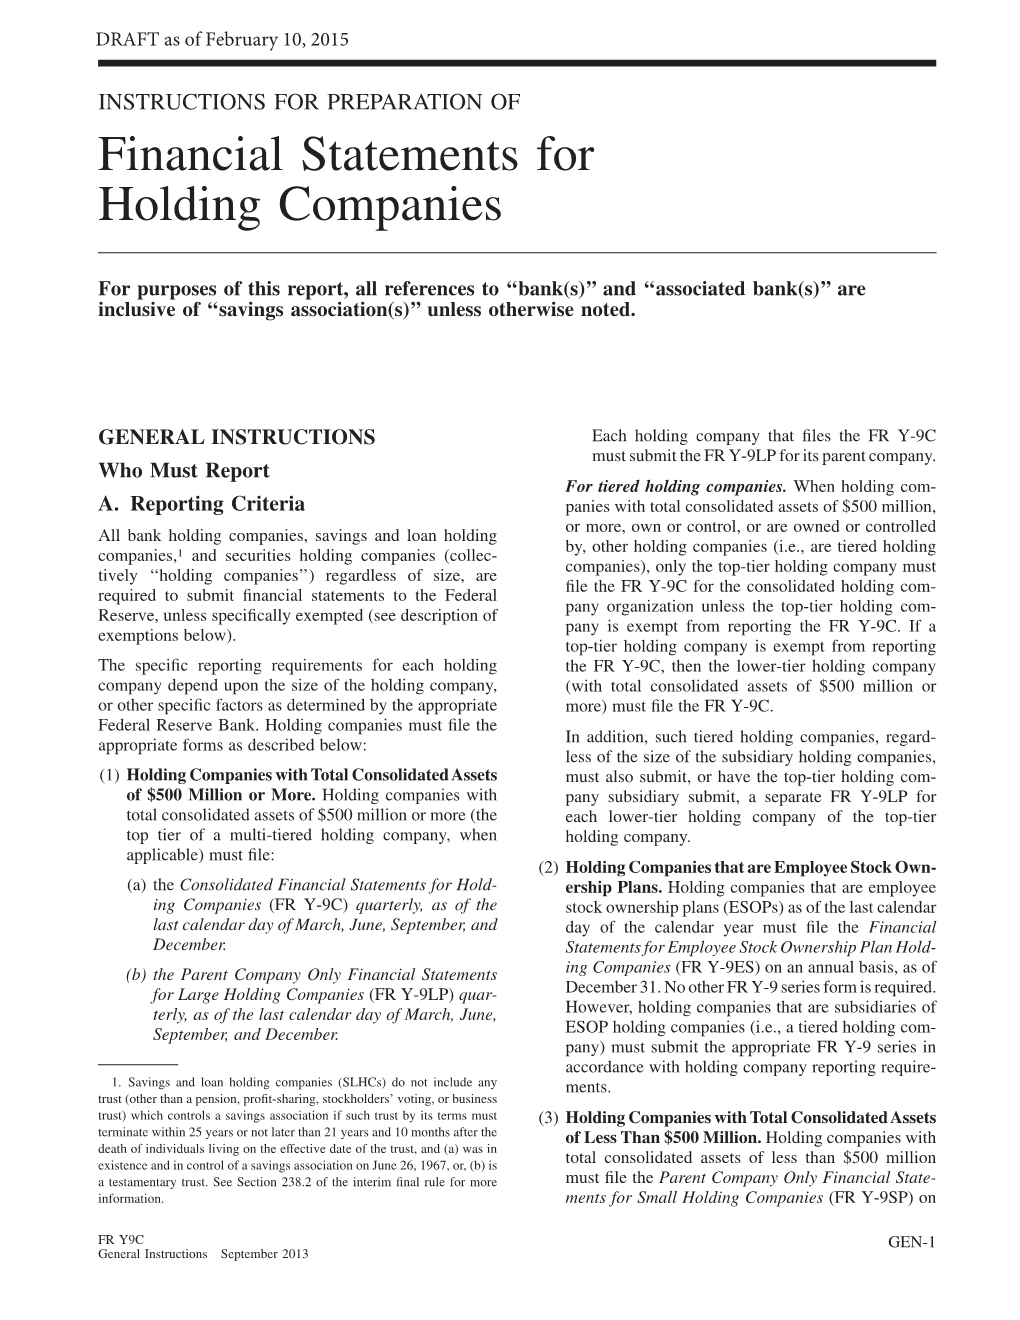 Financial Statements for Holding Companies